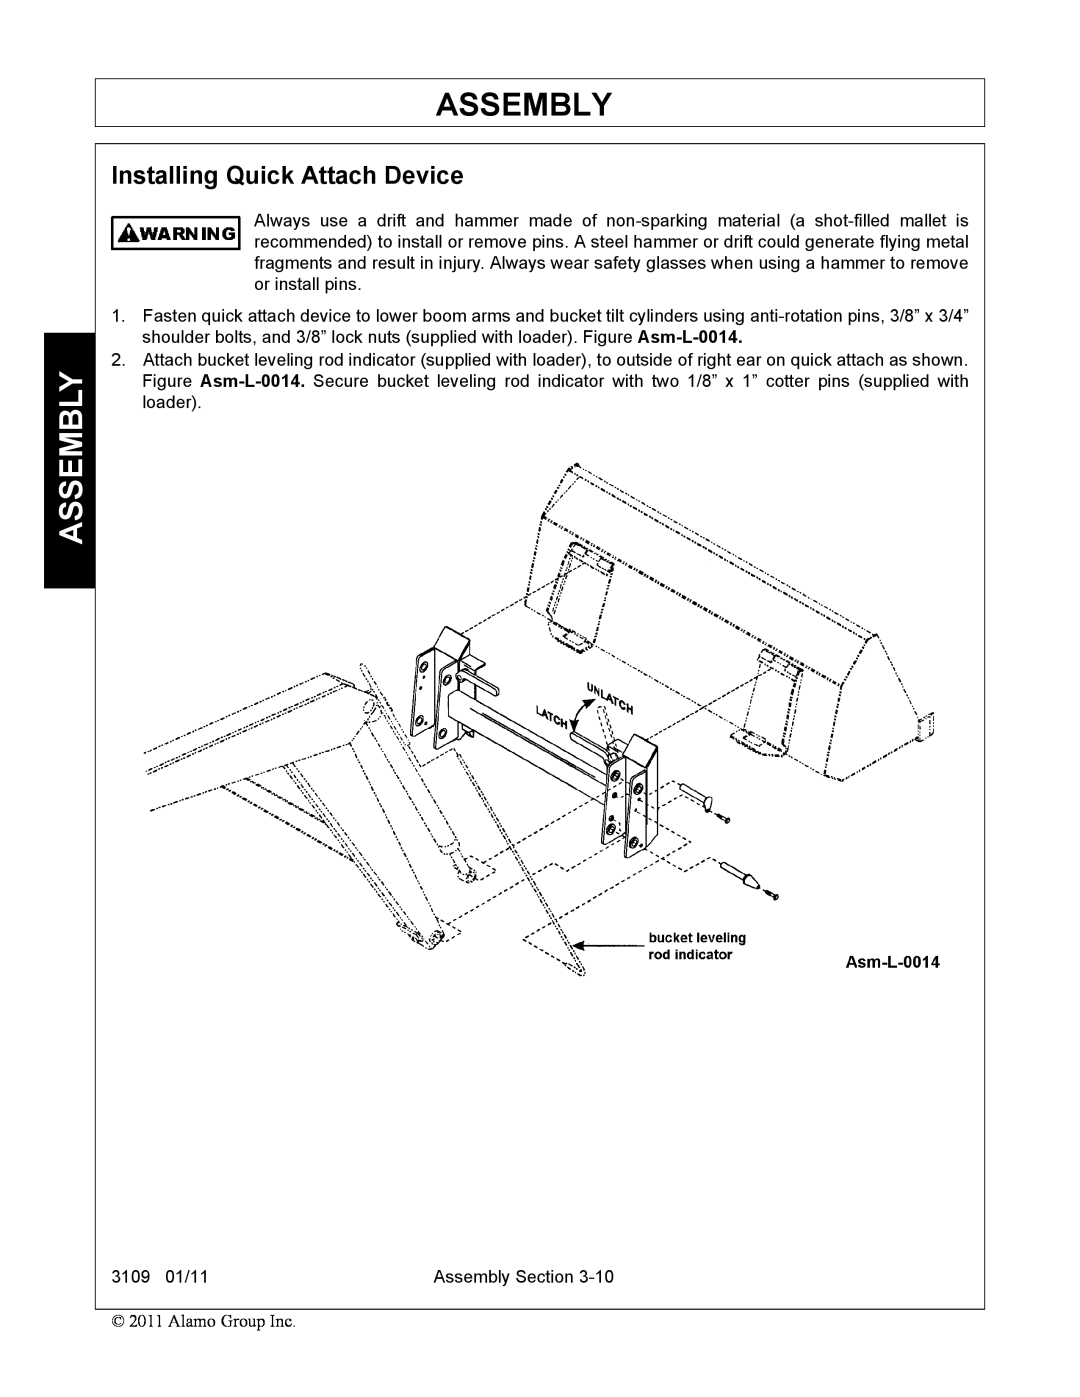 Alamo 3109 manual Assembly, Installing Quick Attach Device 